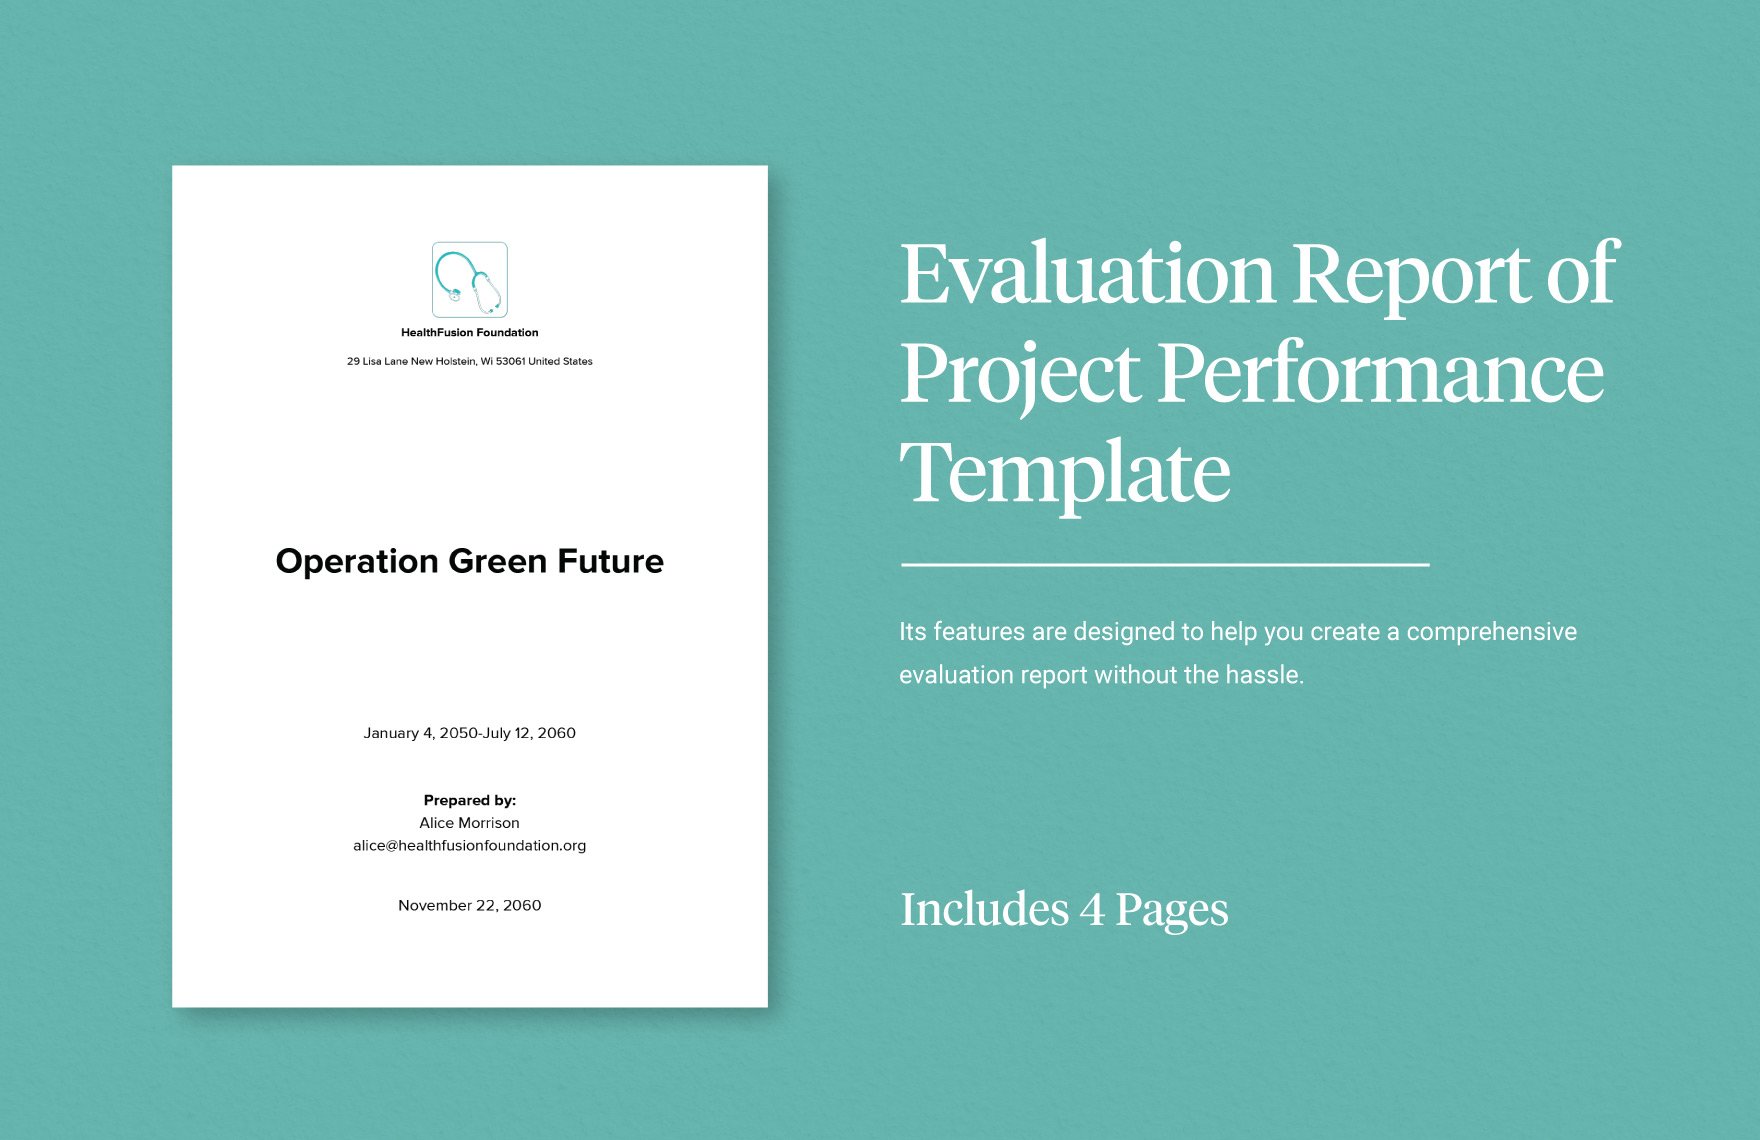 Evaluation Report of Project Performance Template